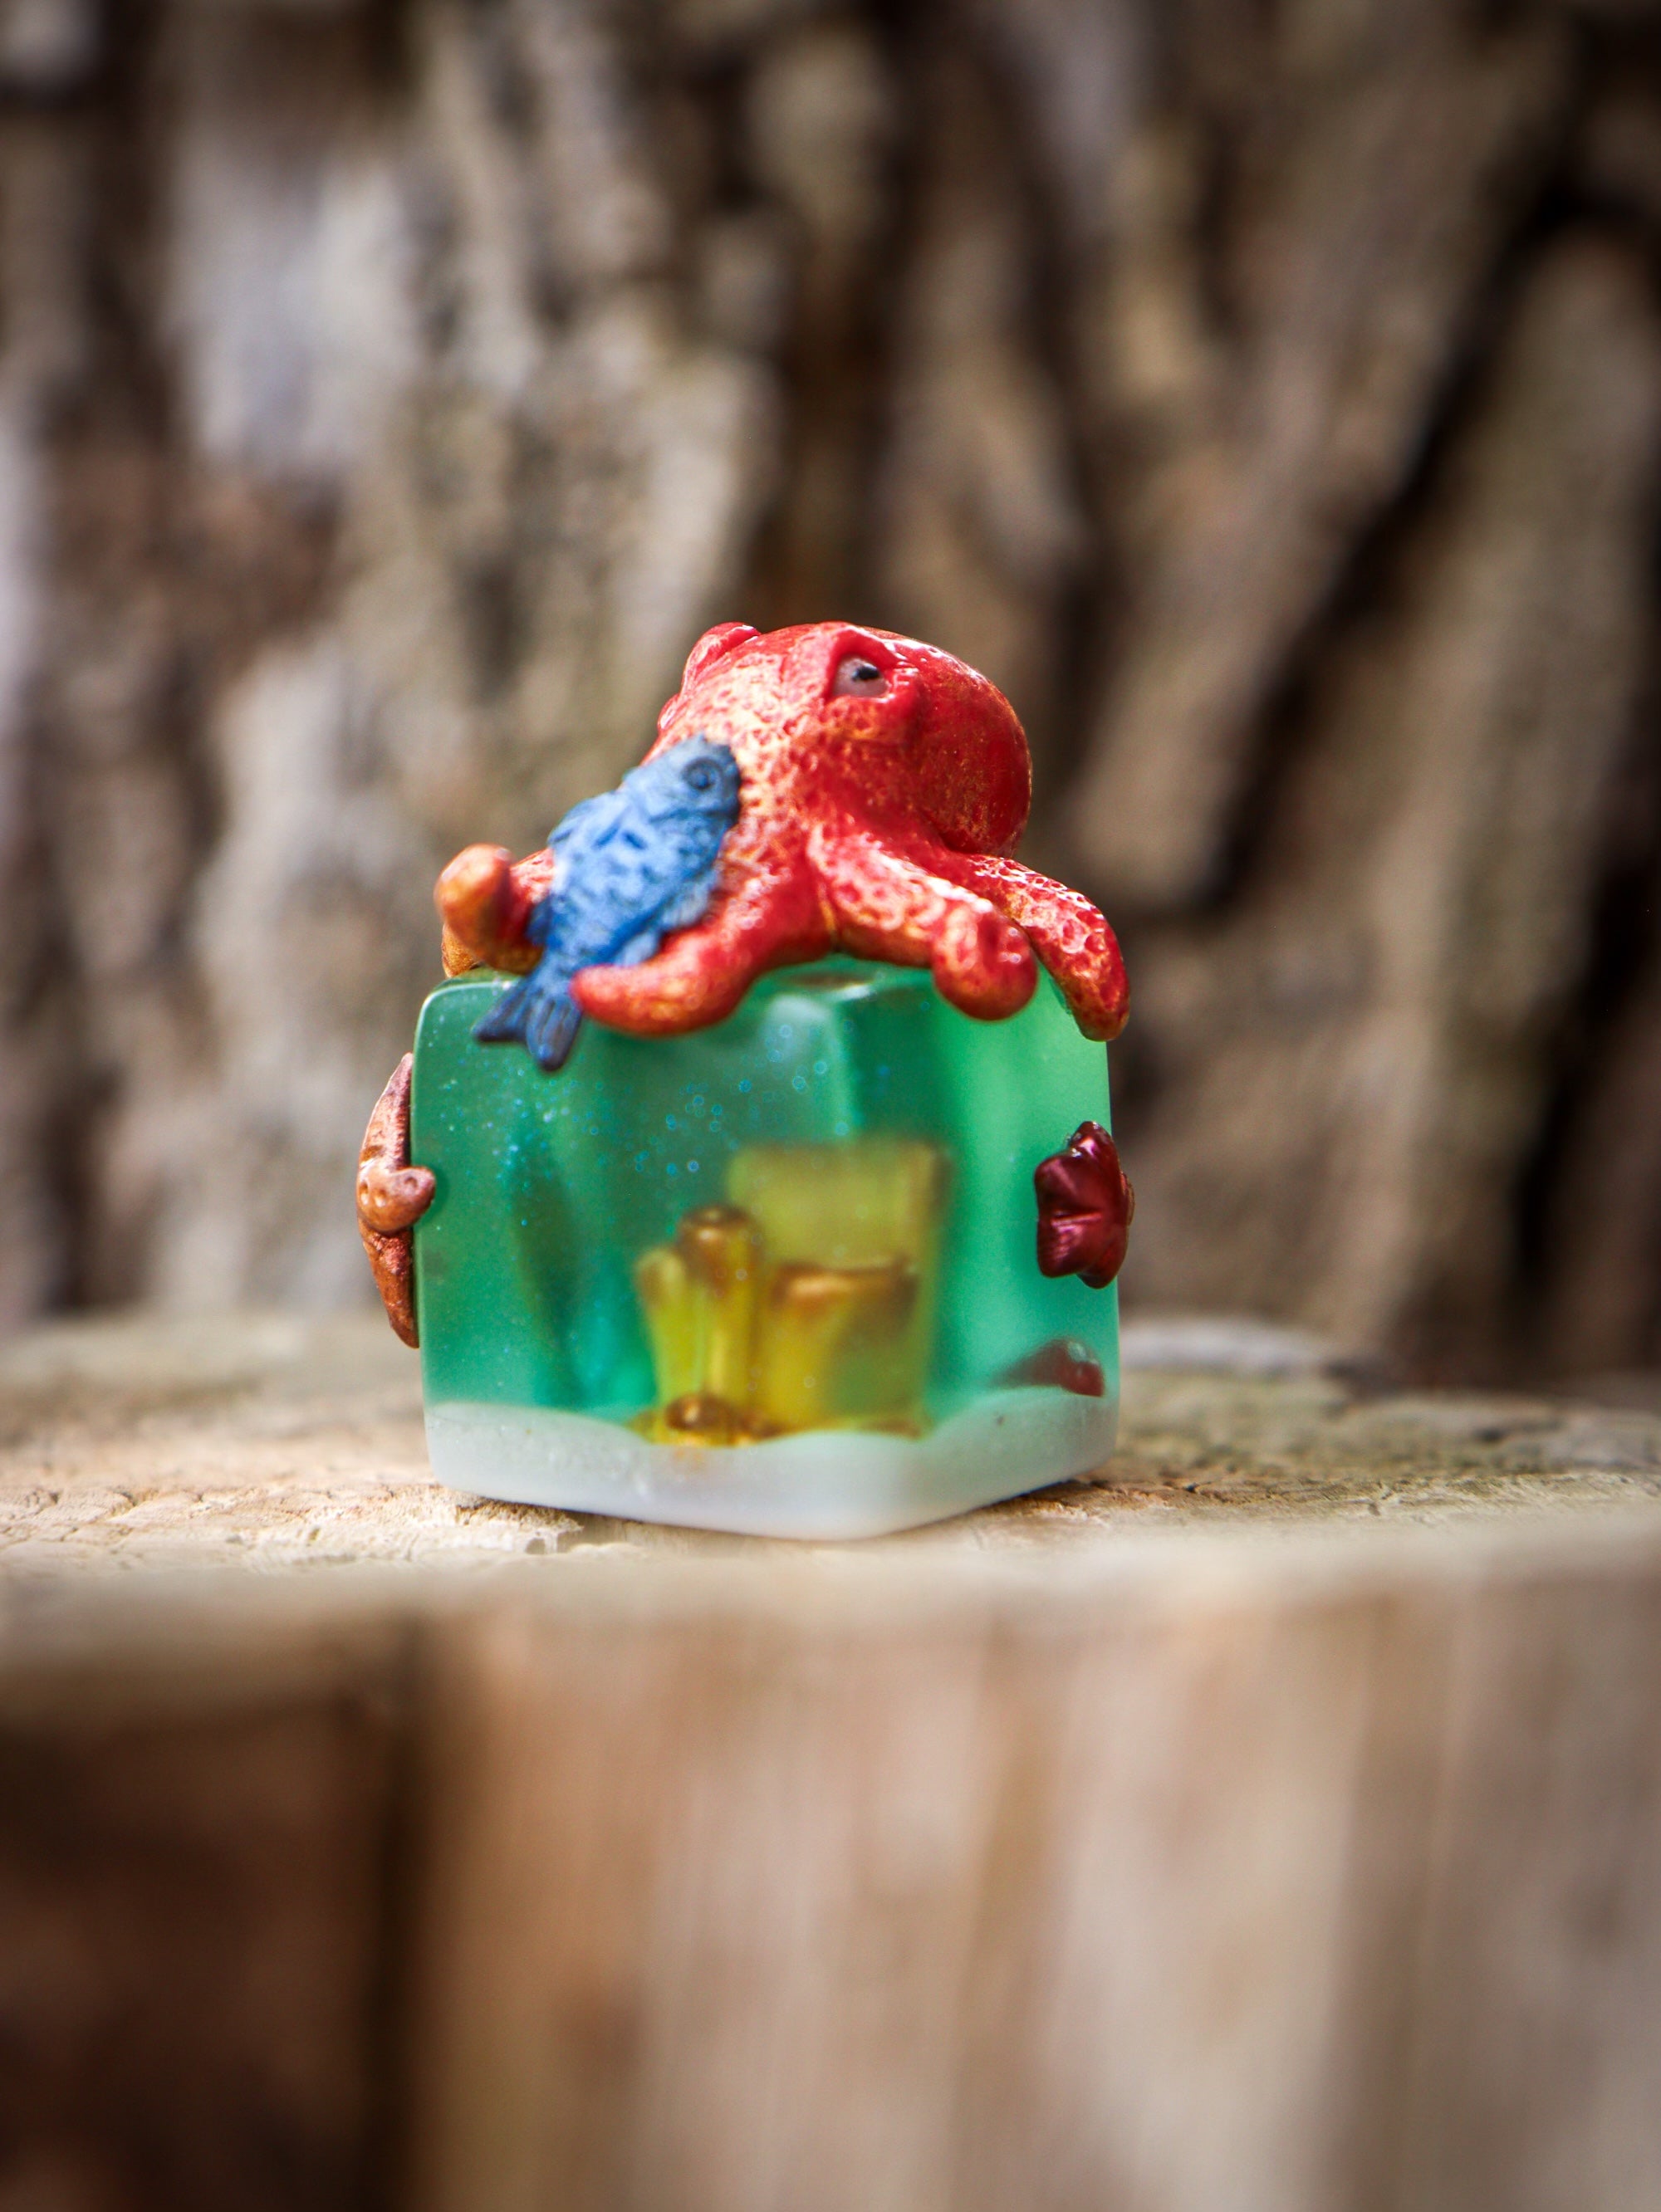 A blind box art toy: Little Shit Big Deal - CUBES by Fairies And Fancies. Sculpted by Dr. Polpz. Features a small red octopus, blue fish, and green cube.